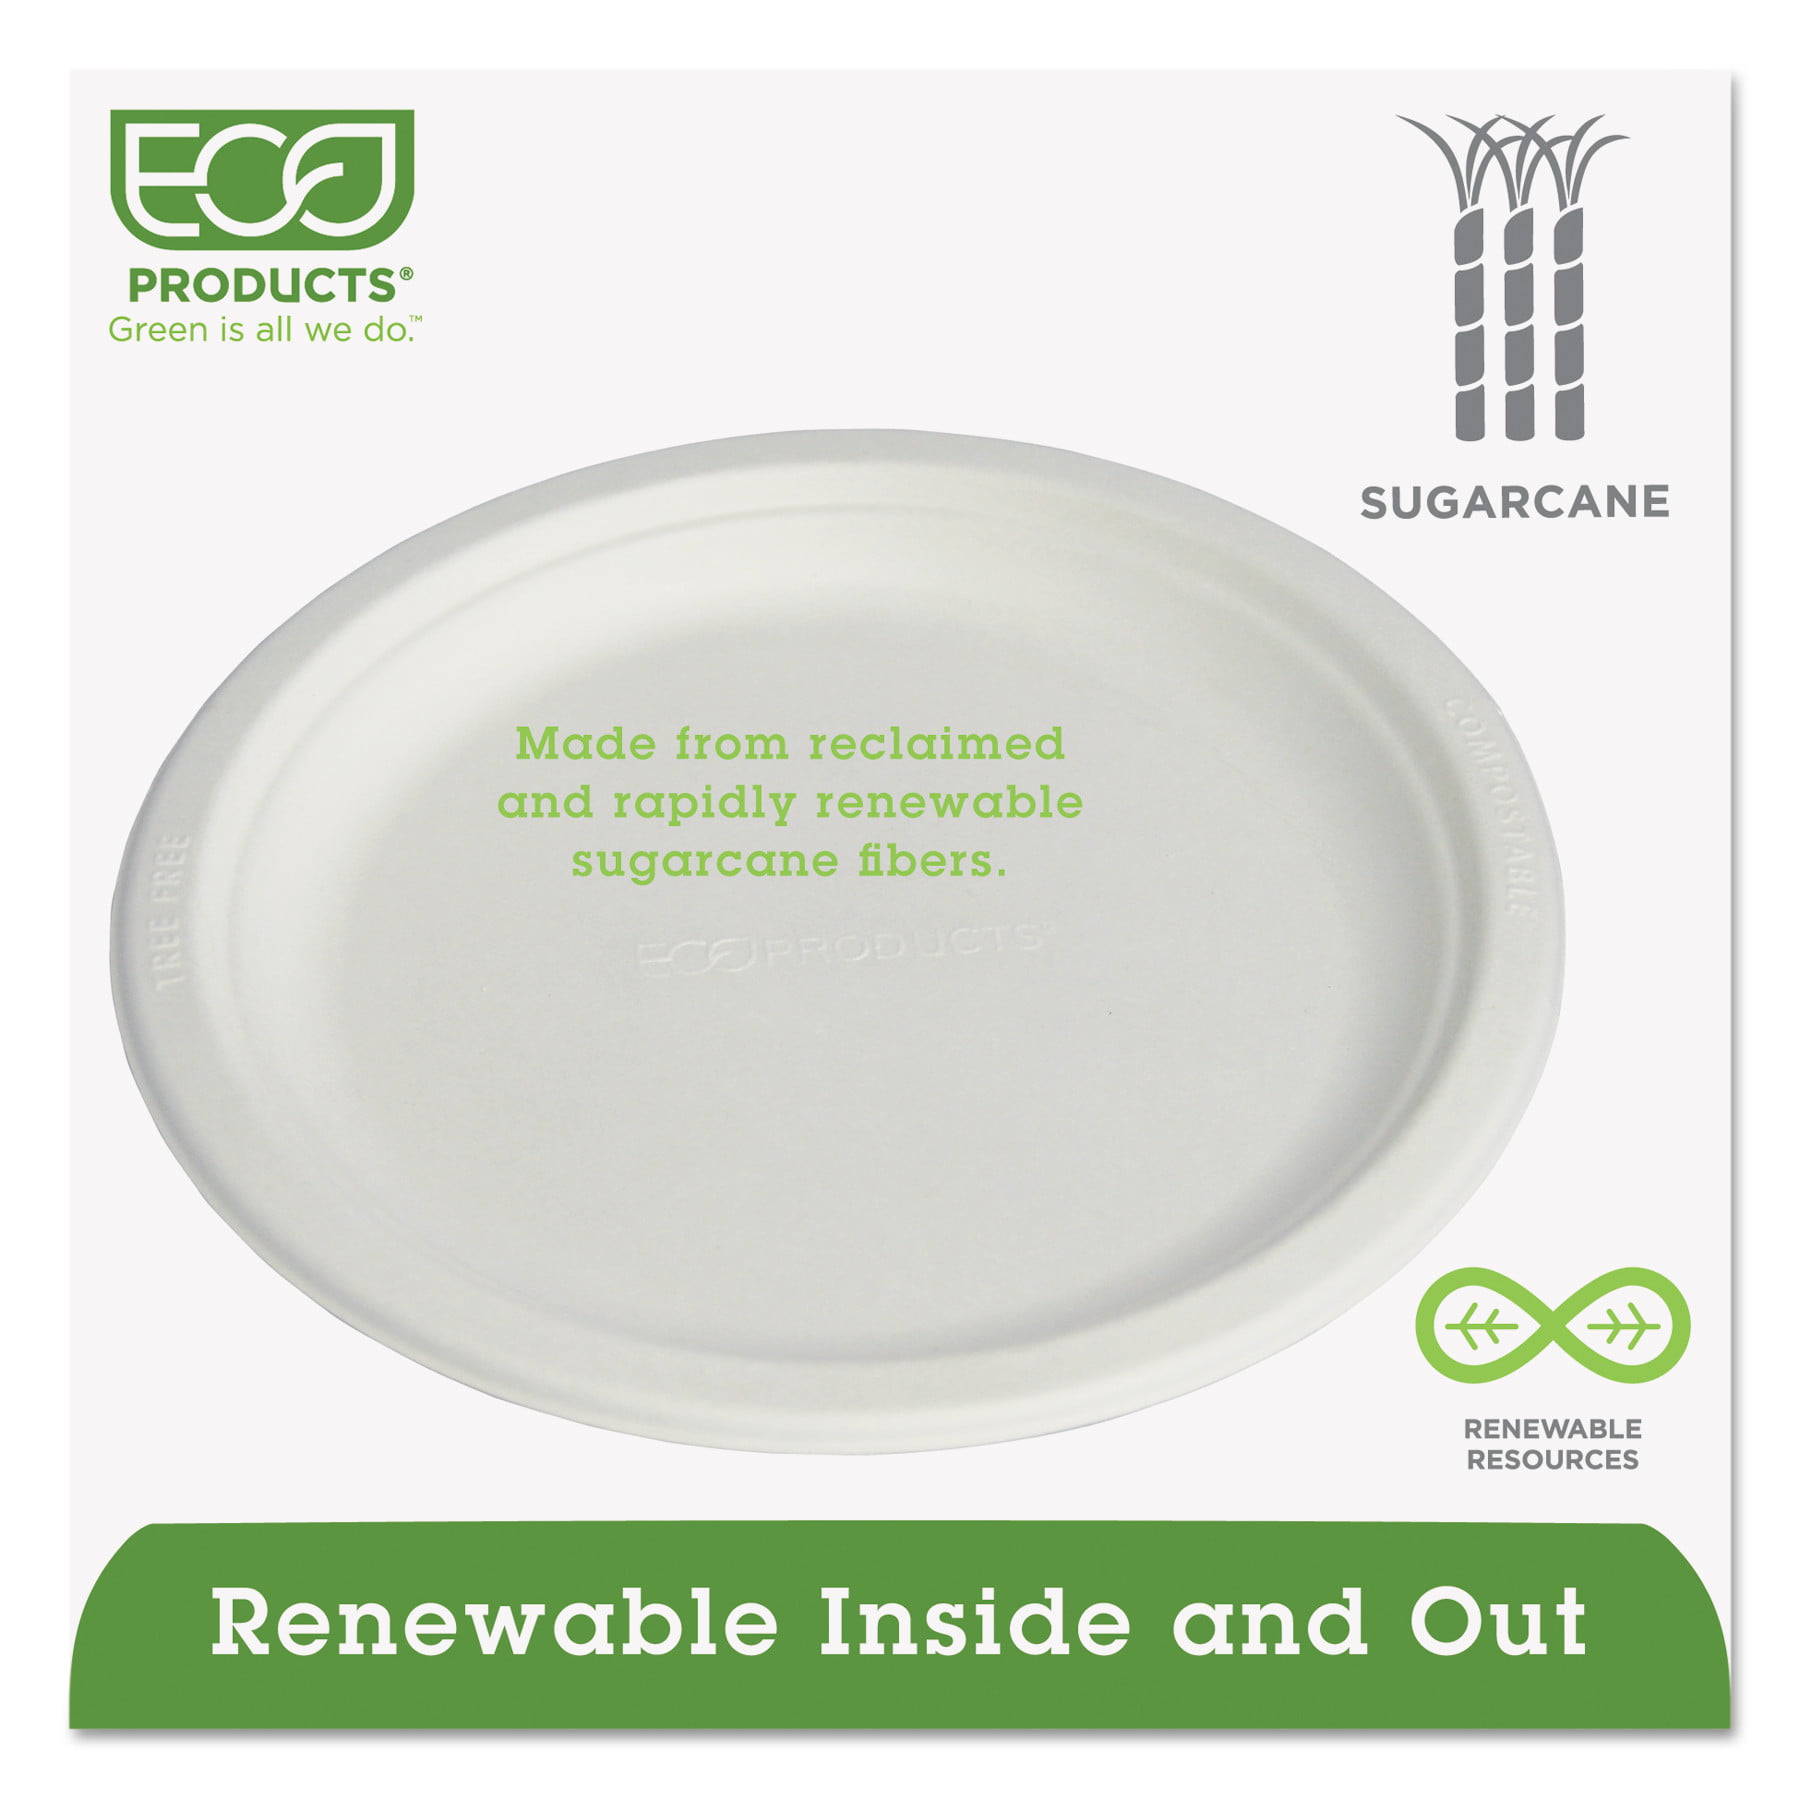 120 x 80 X H 15 MM-Disposable Bio 40 plates from sugar cane in White Rectangular 